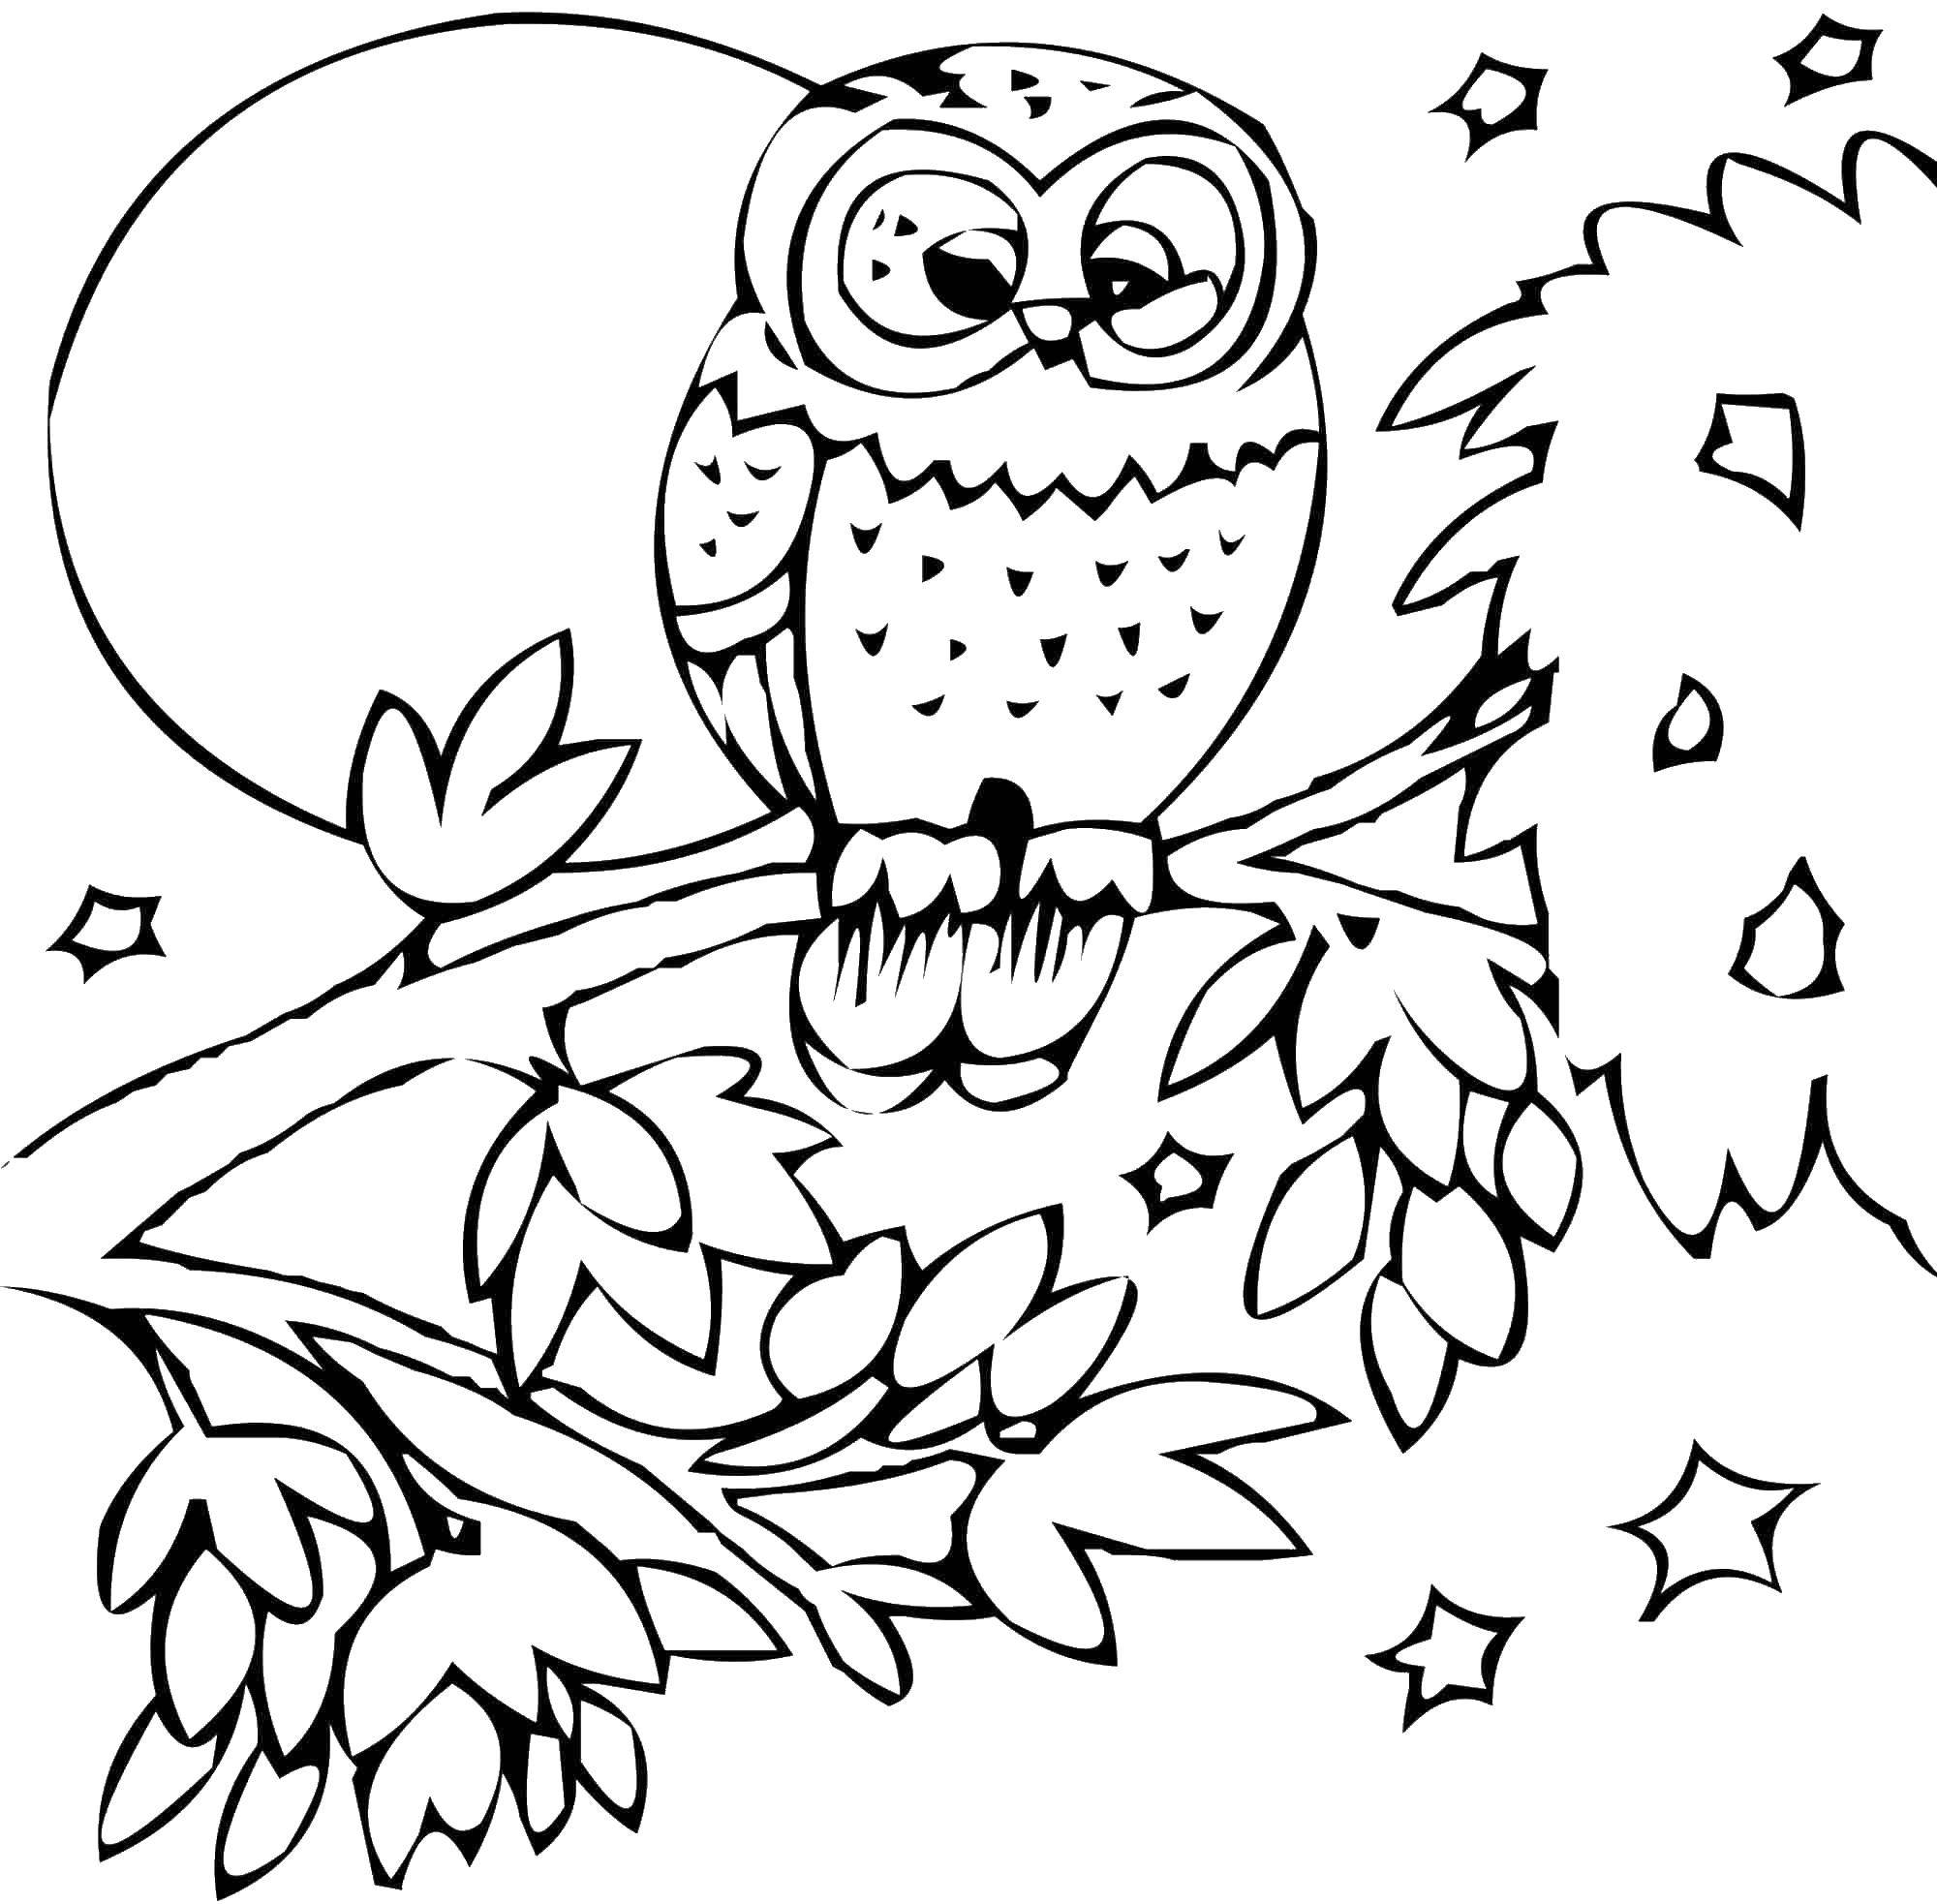 Coloring Owl on the branch. Category birds. Tags:  birds, owl, branch.